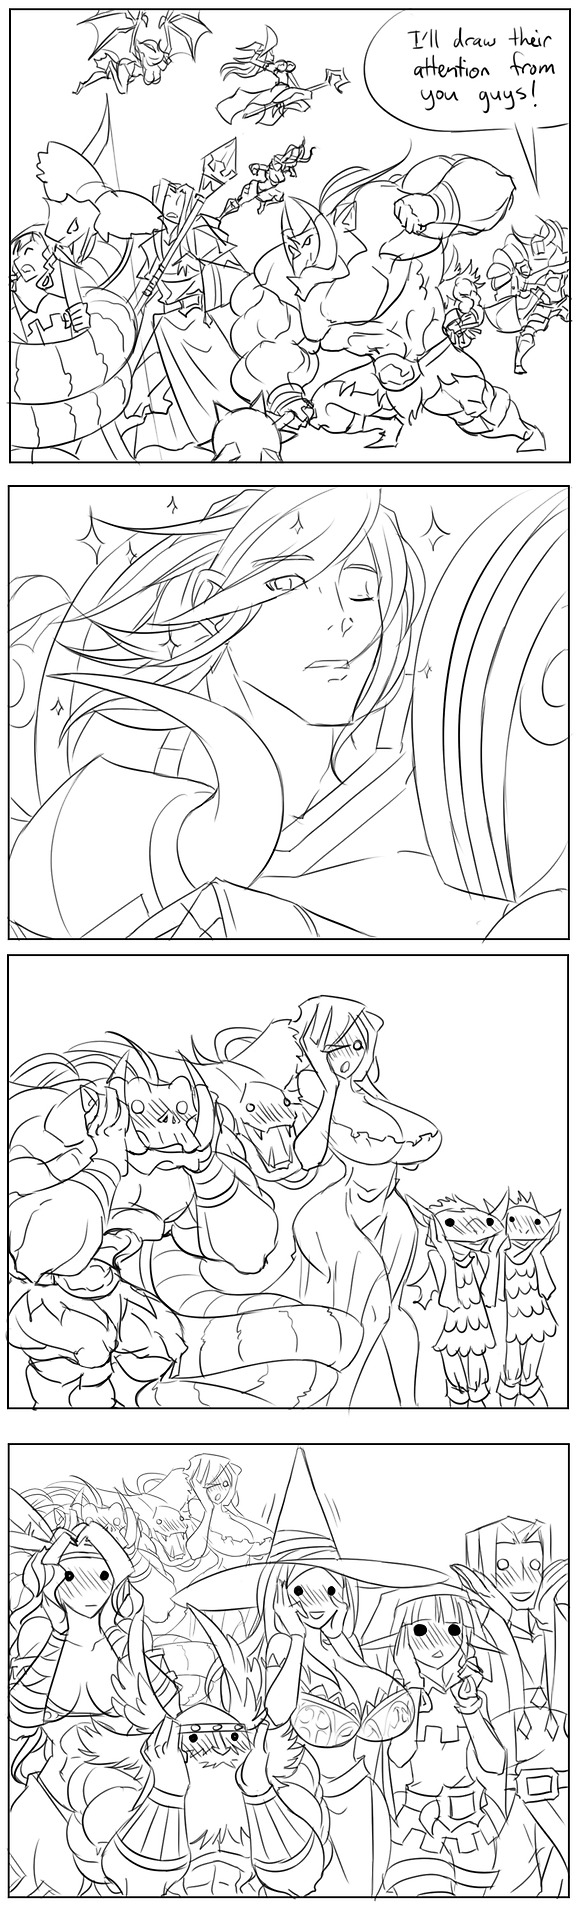 3boys 3girls 4koma amazon_(dragon's_crown) amazon_(dragon&#39;s_crown) amazon_(dragon&#x27;s_crown) amazon_(dragon's_crown) blush boots breasts comic commentary demon_girl dragon's_crown dragon&#39;s_crown dragon&#x27;s_crown dragon's_crown dwarf_(dragon's_crown) dwarf_(dragon&#39;s_crown) dwarf_(dragon&#x27;s_crown) dwarf_(dragon's_crown) elf_(dragon's_crown) elf_(dragon&#39;s_crown) elf_(dragon&#x27;s_crown) elf_(dragon's_crown) english everyone everyone_fighting fabulous fighter_(dragon's_crown) fighter_(dragon&#39;s_crown) fighter_(dragon&#x27;s_crown) fighter_(dragon's_crown) gameplay_mechanics goblin hair_flip hands_on_own_face hat headwear_removed helmet helmet_removed highres horned_helmet huge_breasts matsu-sensei monochrome multiple_boys multiple_girls orc sorceress_(dragon's_crown) sorceress_(dragon&#39;s_crown) sorceress_(dragon&#x27;s_crown) sorceress_(dragon's_crown) sparkle succubus thigh_boots thighhighs witch_hat wizard_(dragon's_crown) wizard_(dragon&#39;s_crown) wizard_(dragon&#x27;s_crown) wizard_(dragon's_crown)